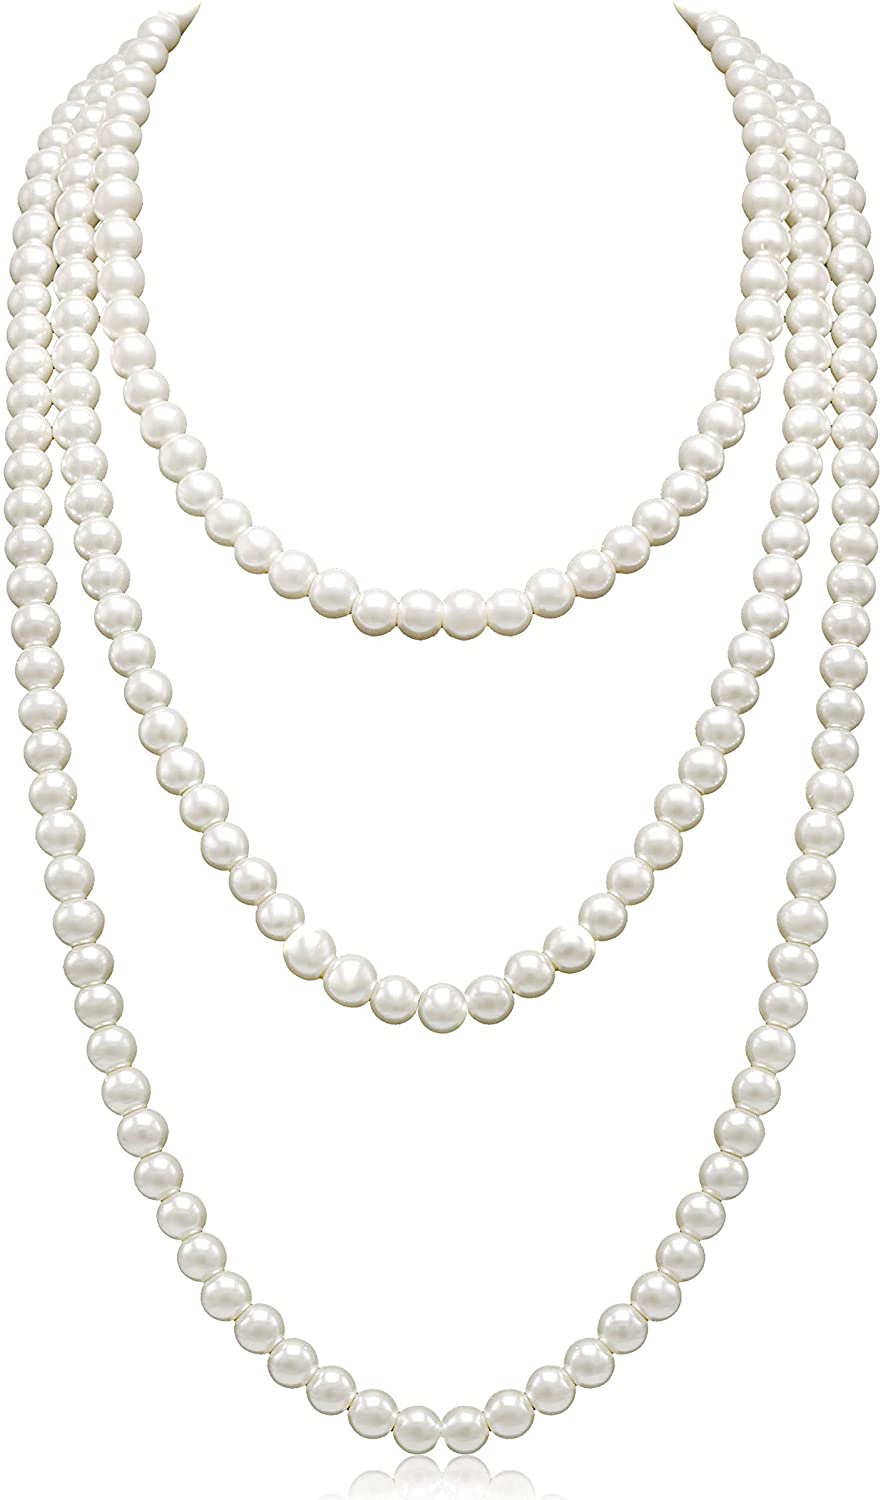 Aisansty Long Pearl Necklaces for Women Cream White Faux Pearl Strand Layered Necklace Costume Jewelry,69"